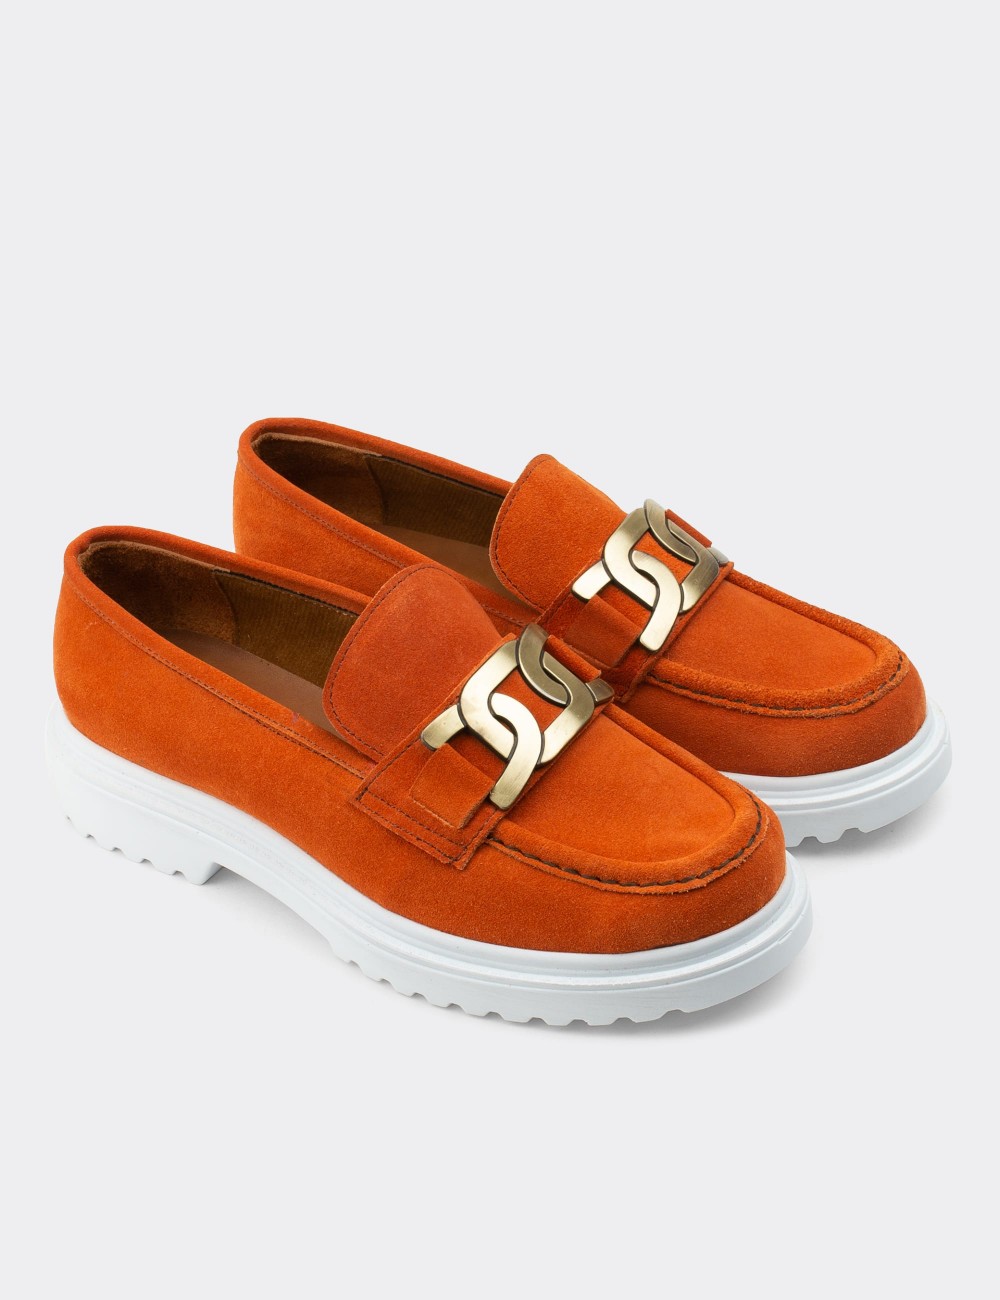 Orange Suede Leather Loafers - 01902ZTRCP01